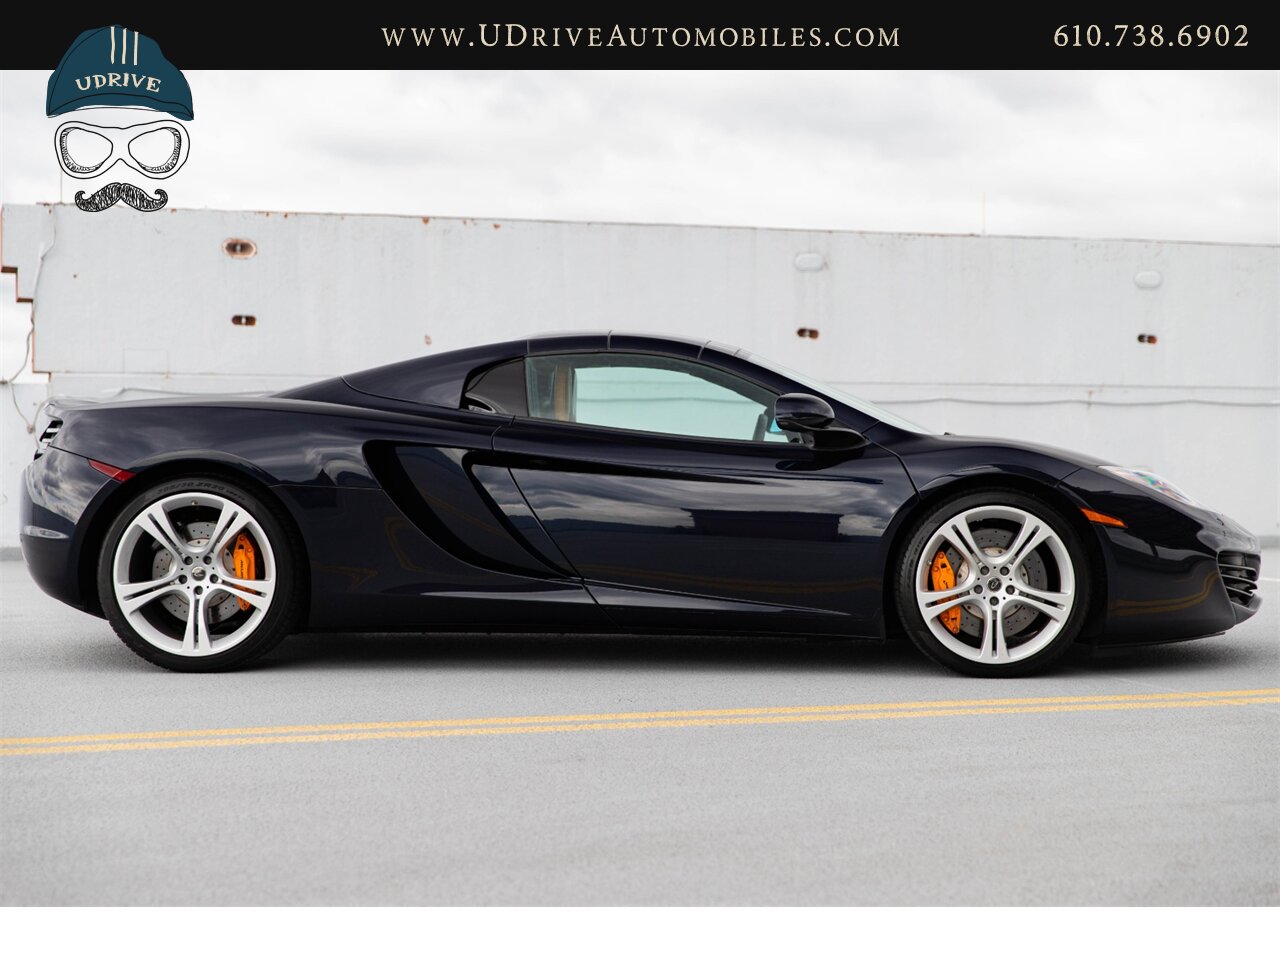 2013 McLaren MP4-12C Spider 1 Owner 6k Miles Carbon Fiber Full Leather  Sapphire Black over Natural Tan Leather - Photo 16 - West Chester, PA 19382